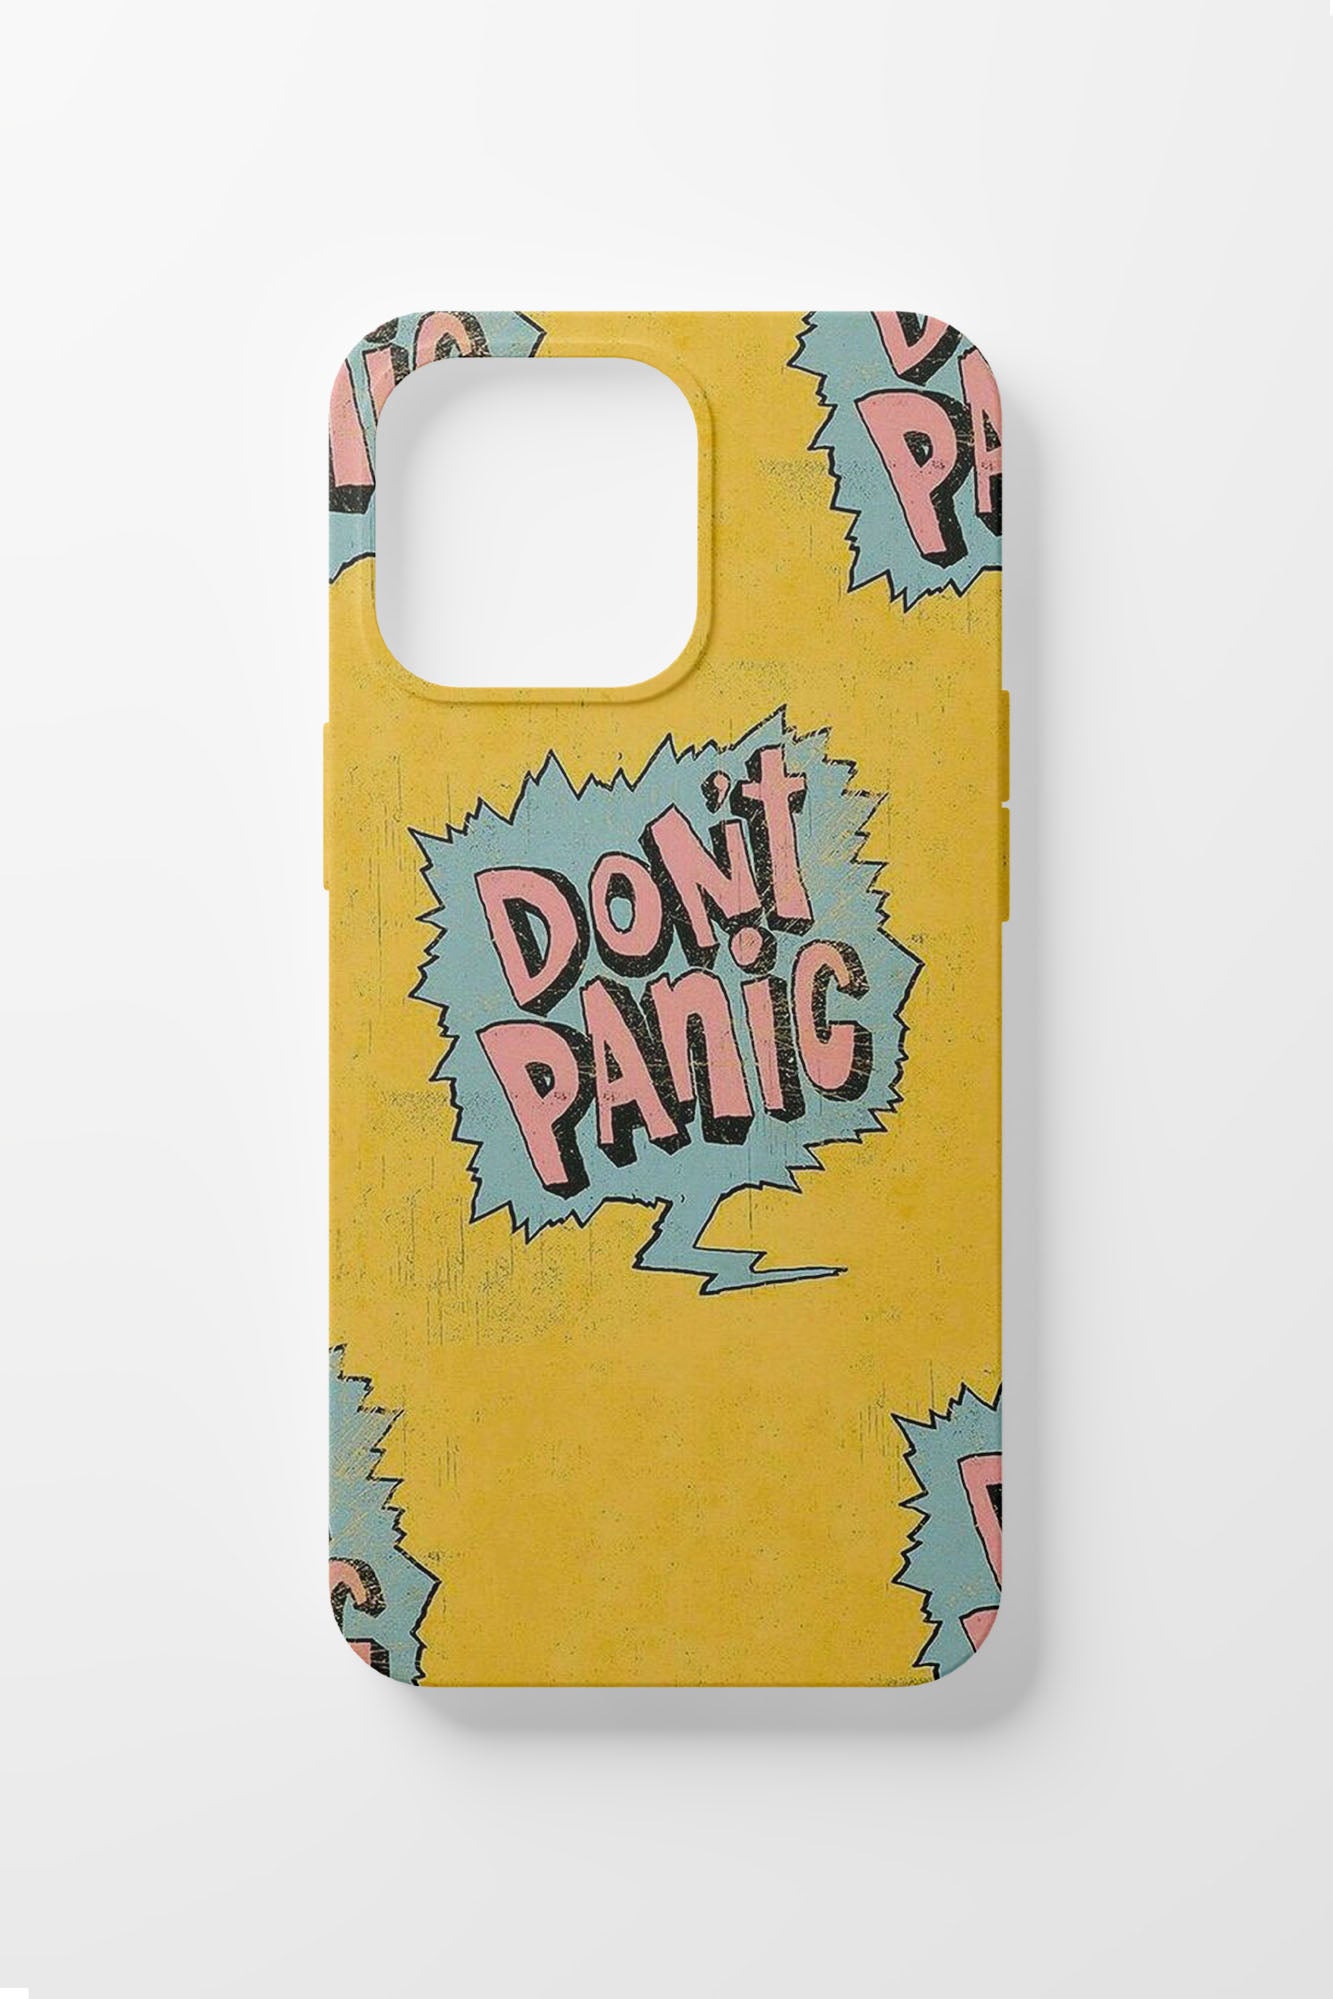 DON'T PANIC iPhone Case